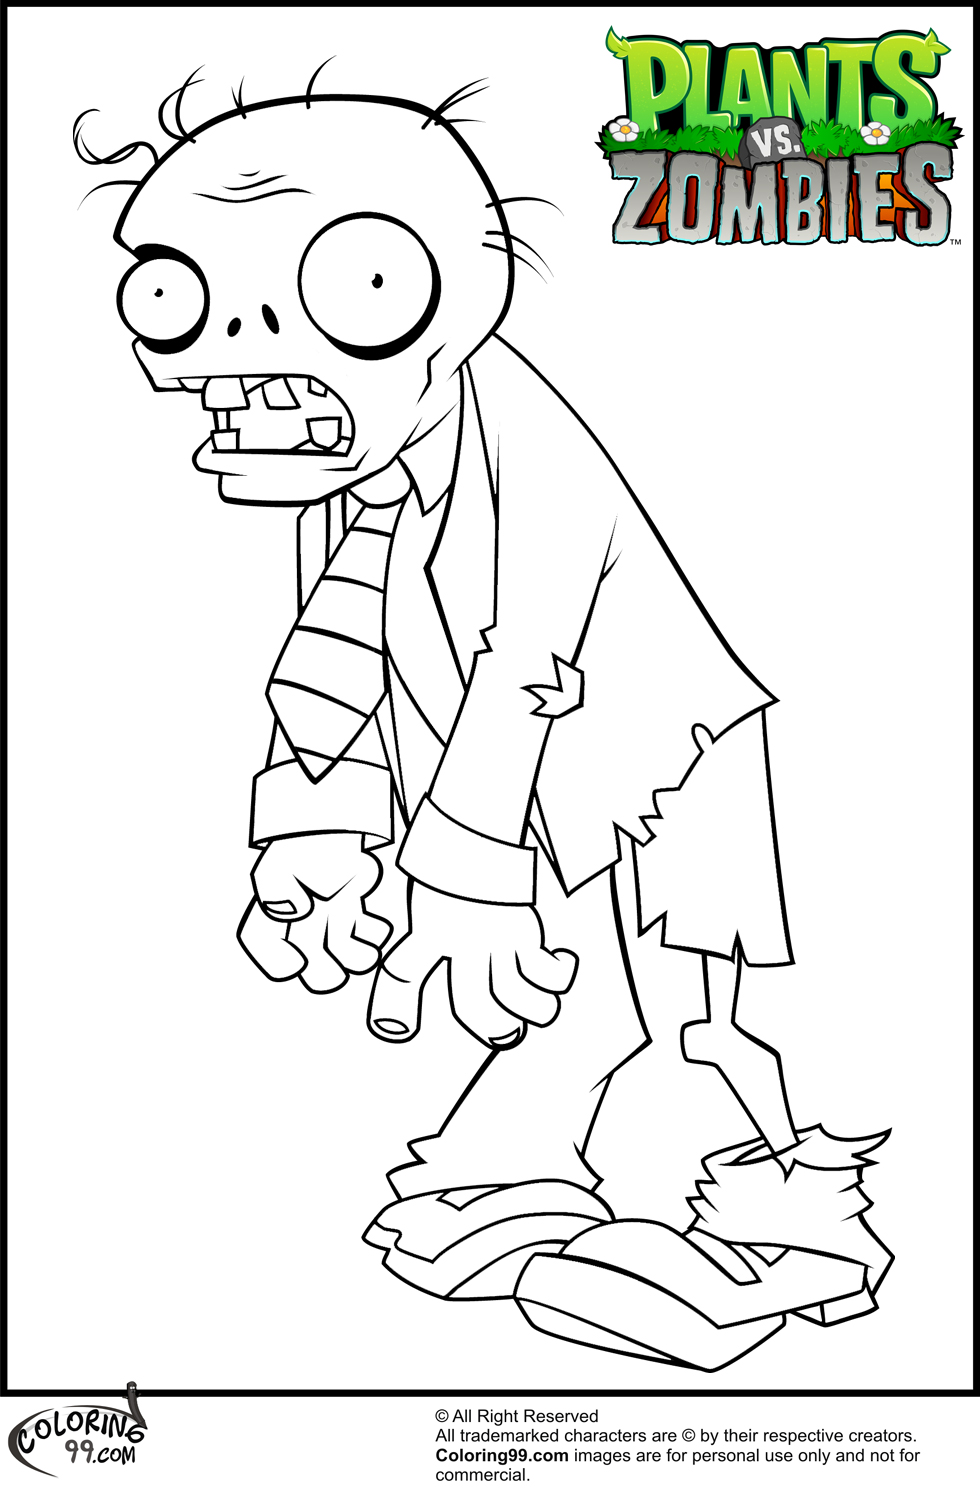 plants vs zombies coloring pages minister coloring